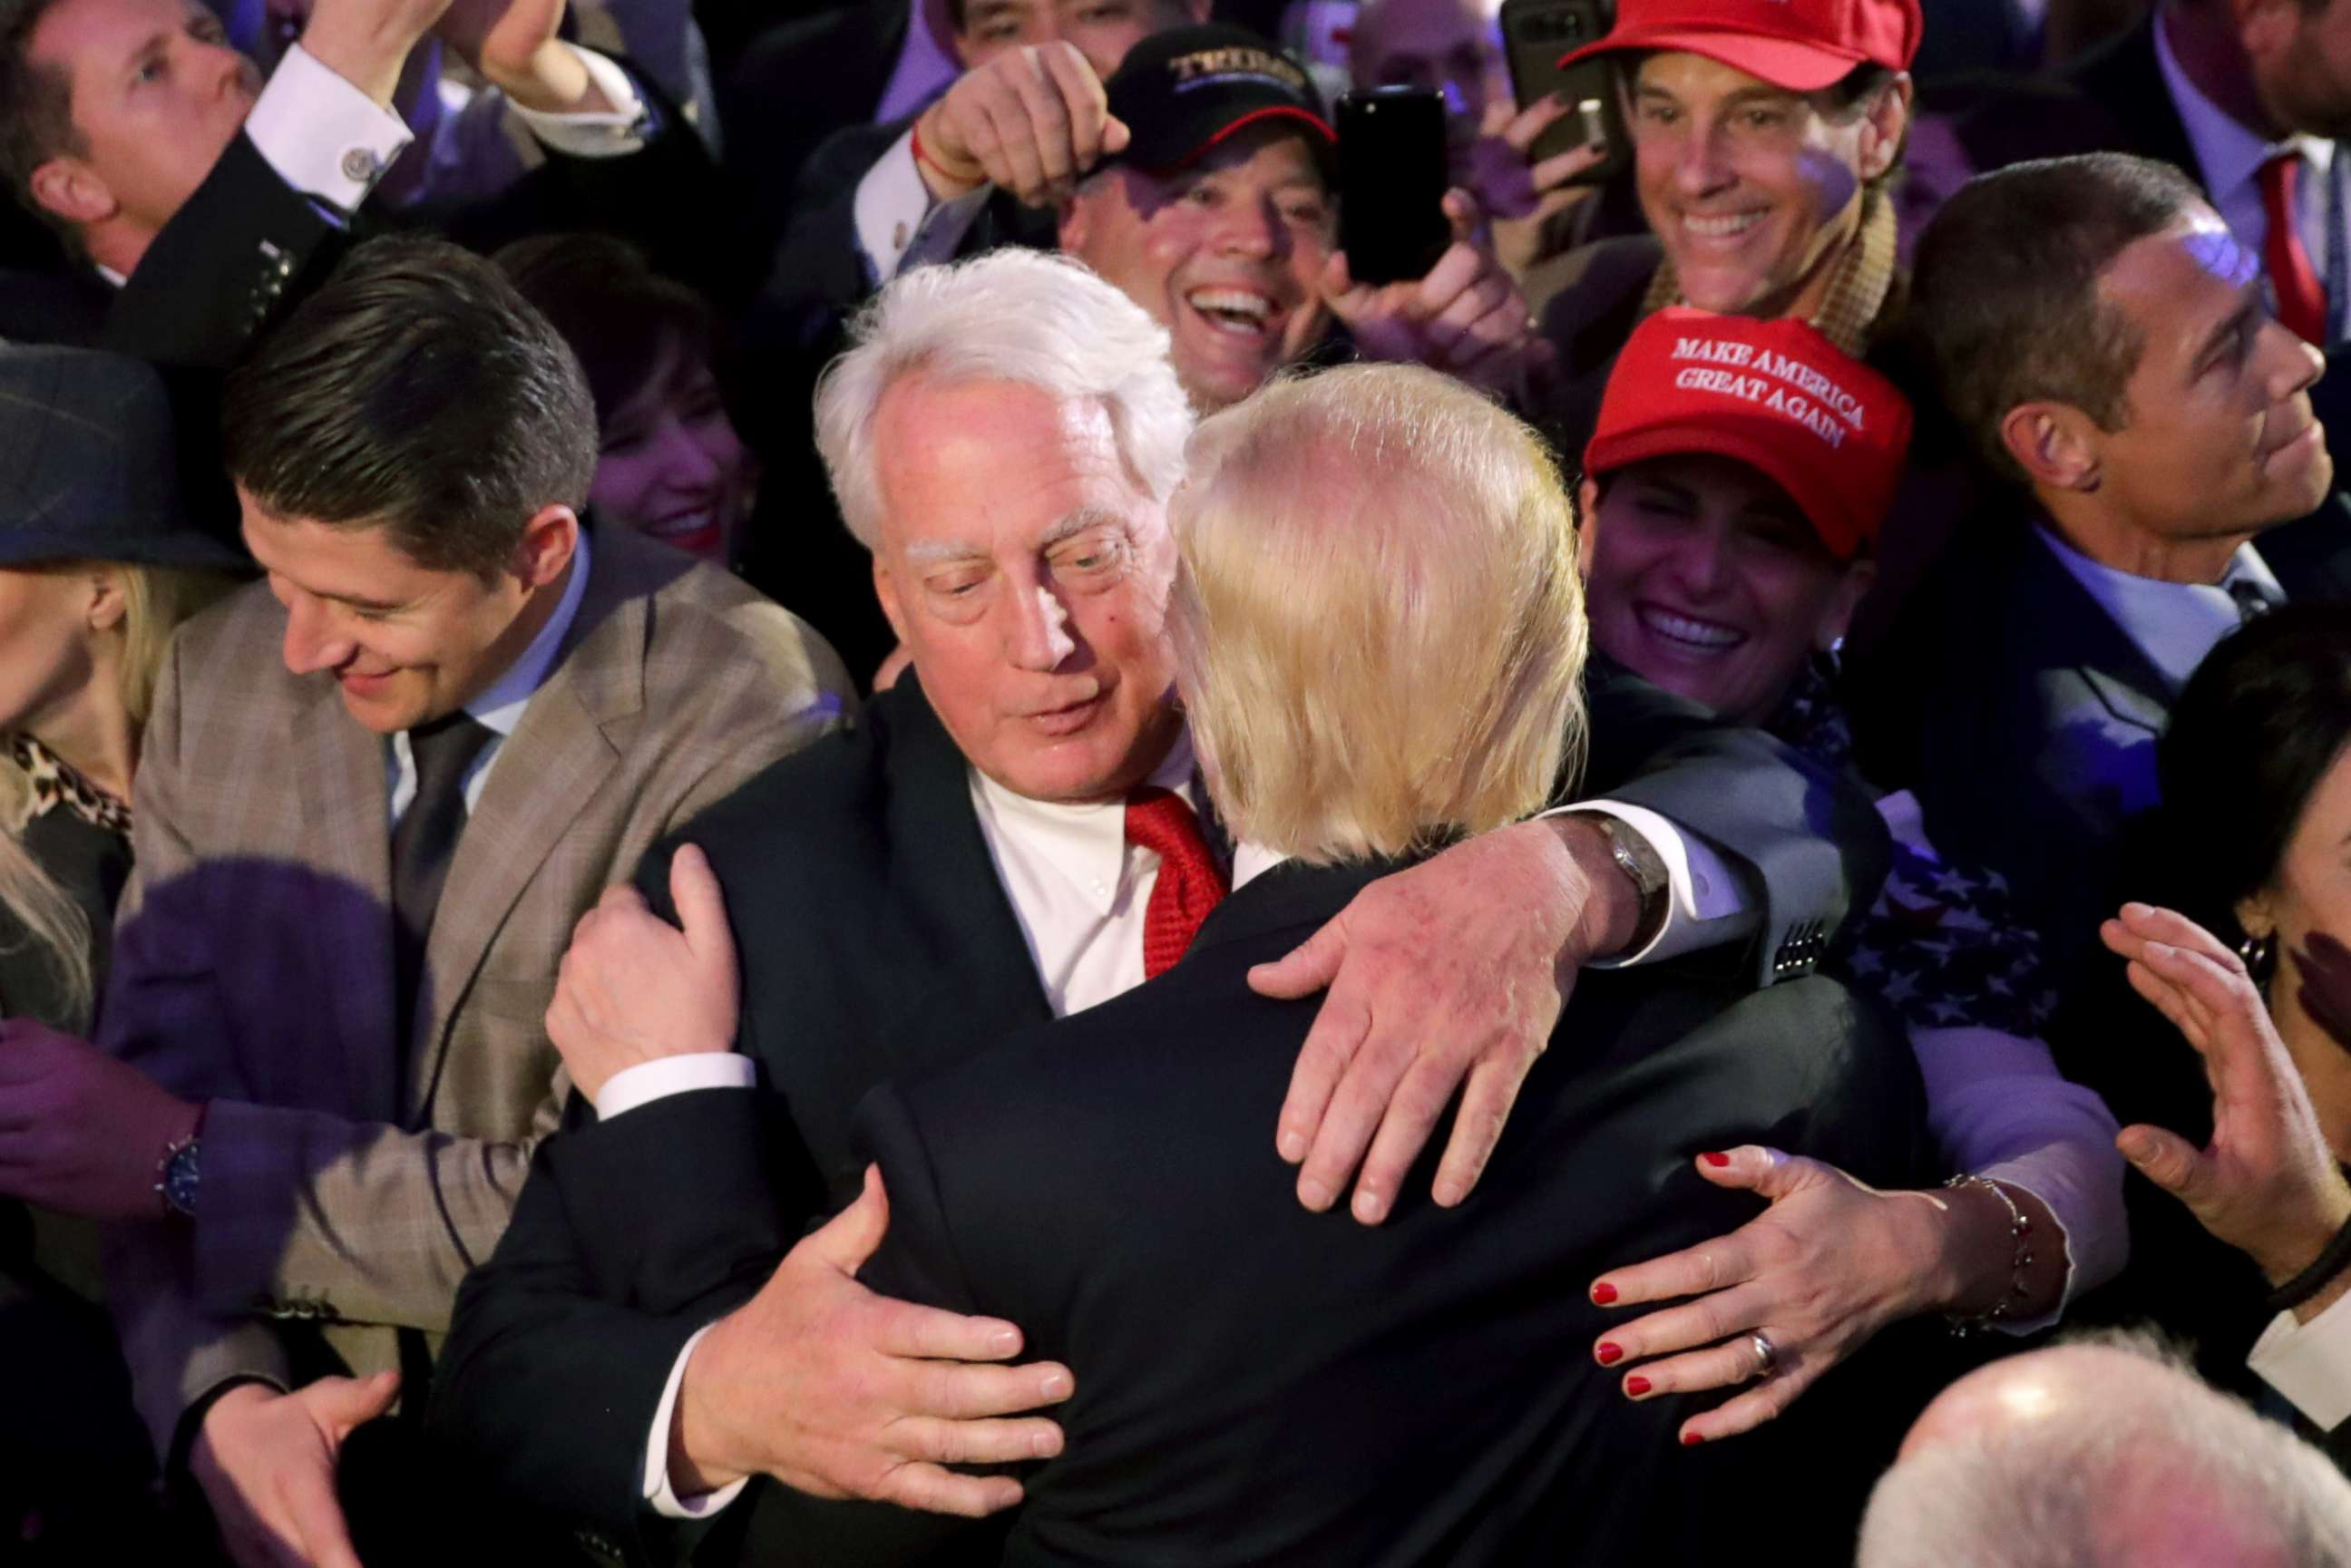 PHOTO: Robert Trump hugs his brother, Republican president-elect Donald Trump, after Donald Trump delivered his acceptance speech at the New York Hilton Midtown in the early morning hours of Nov. 9, 2016, in New York City.